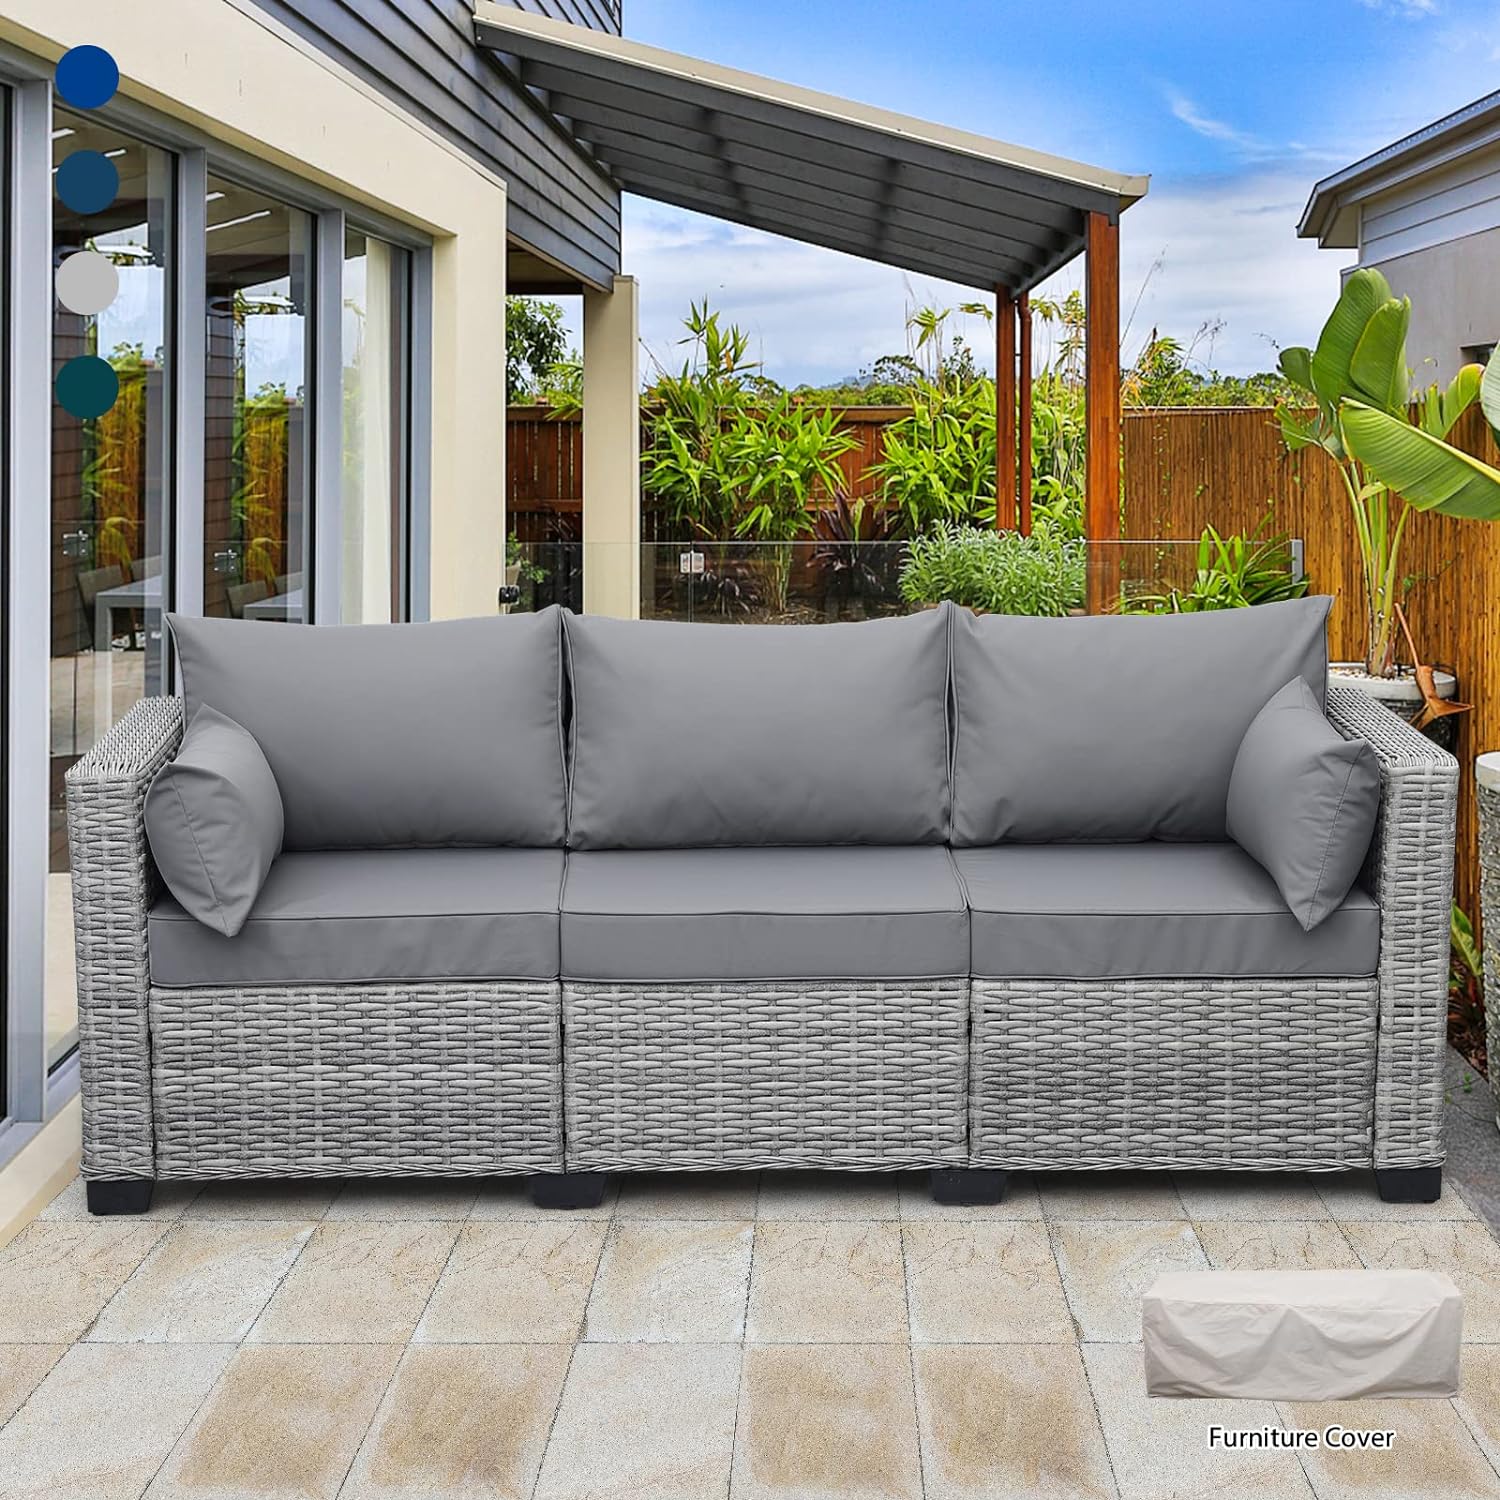 Rattaner Outdoor Furniture Outdoor Couch Grey Wicker Patio Furniture 3-seat Sofa Deep Seat Hight Backrest with Waterproof Cover and Anti-Slip Cushions, Grey